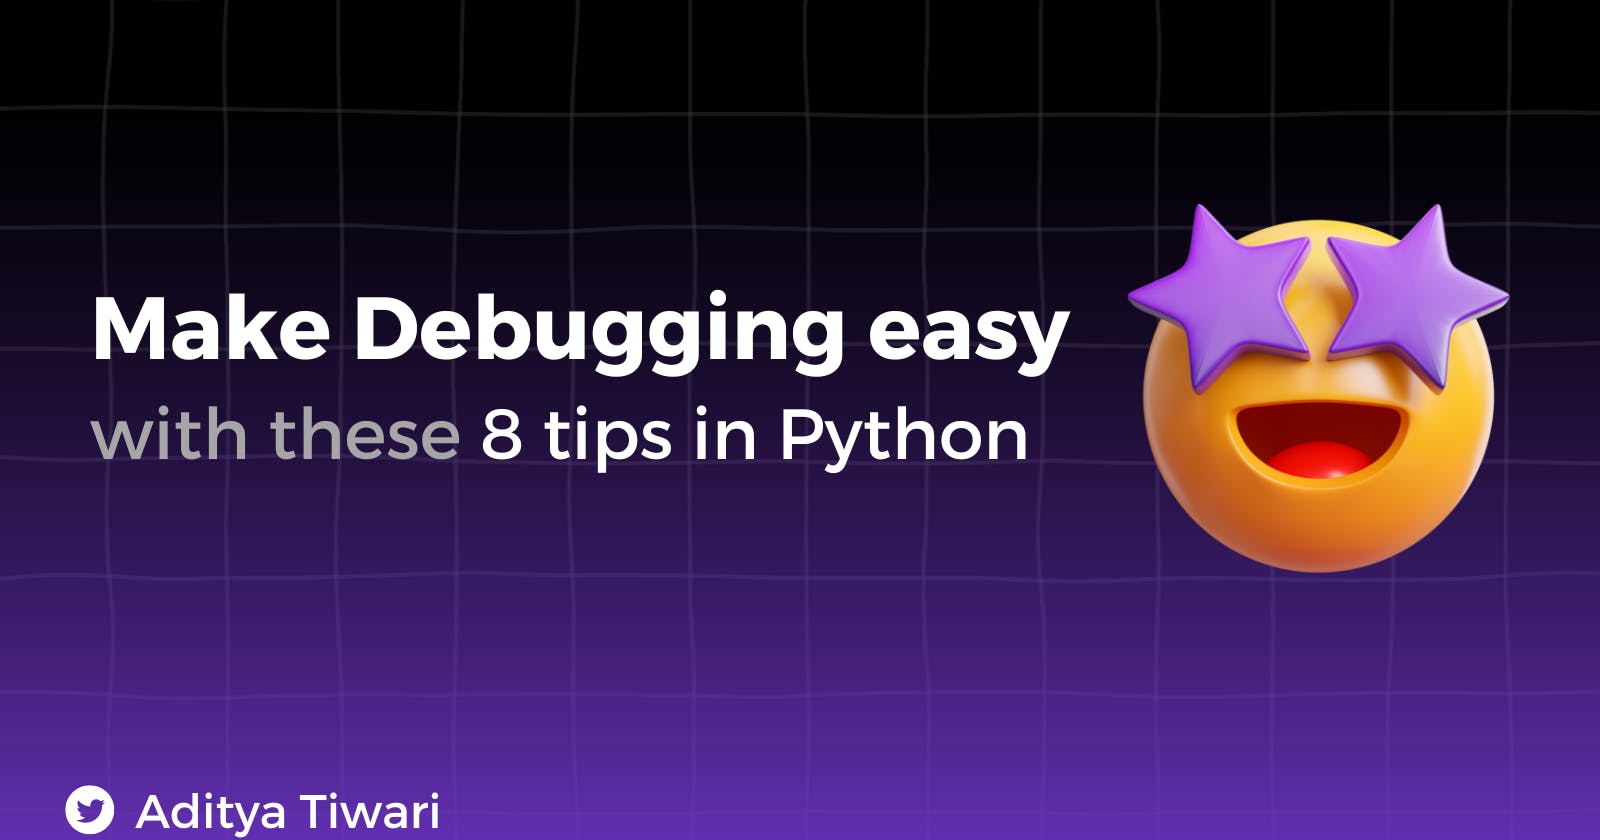 Make your Debugging easier with these 8 tips in Python